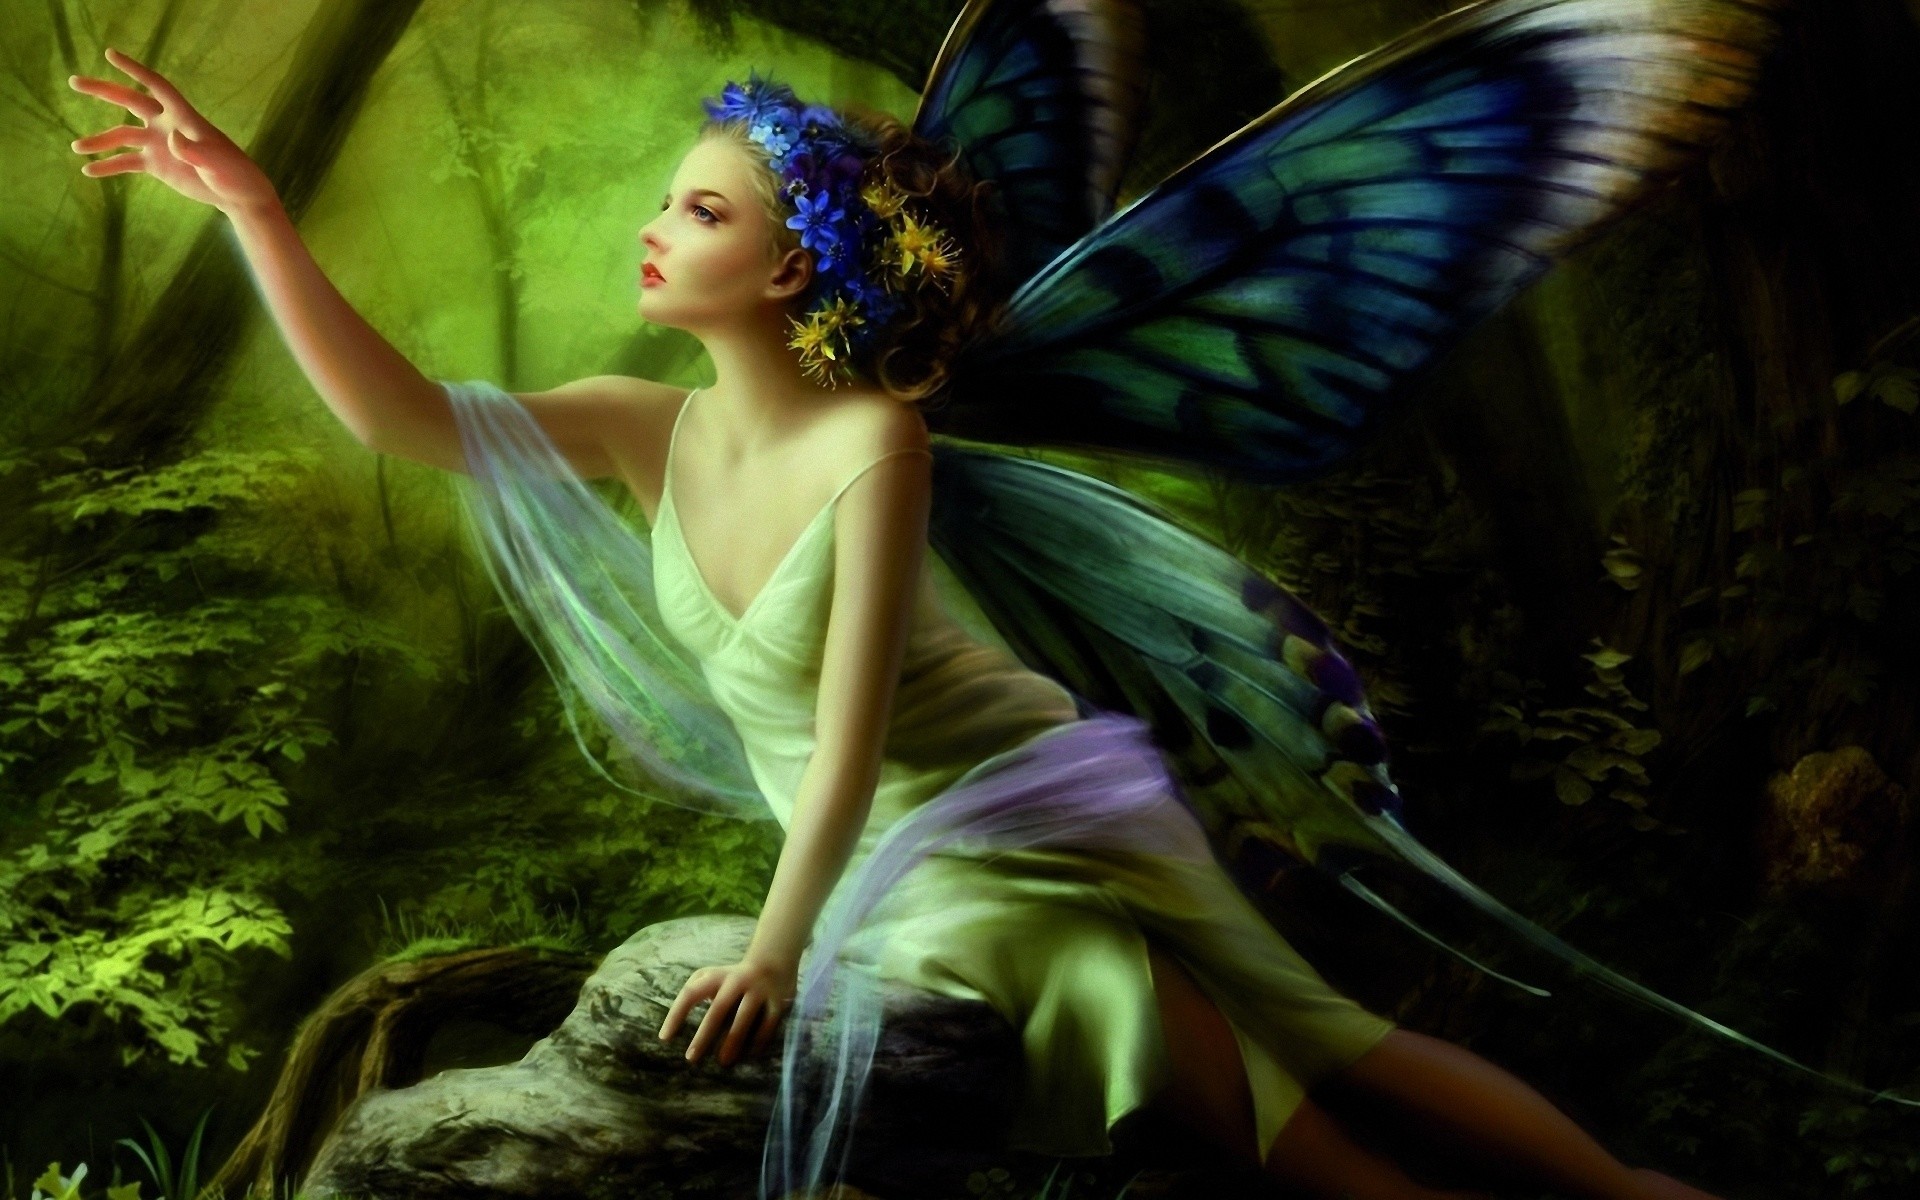 Butterfly Fairy | 1920 x 1200 | Download | Close